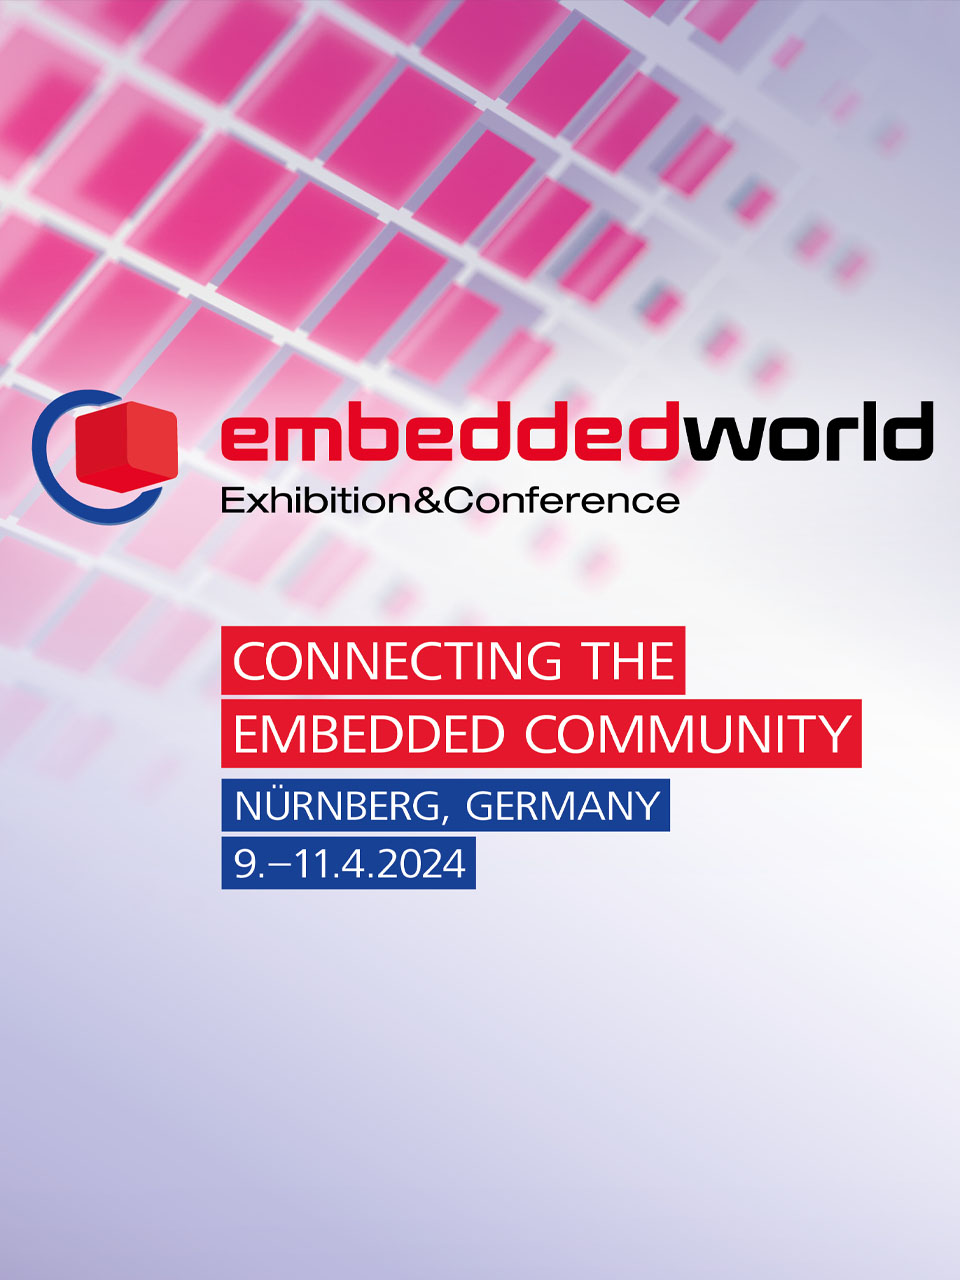 DM Tech Sales at Embedded World Germany 2024